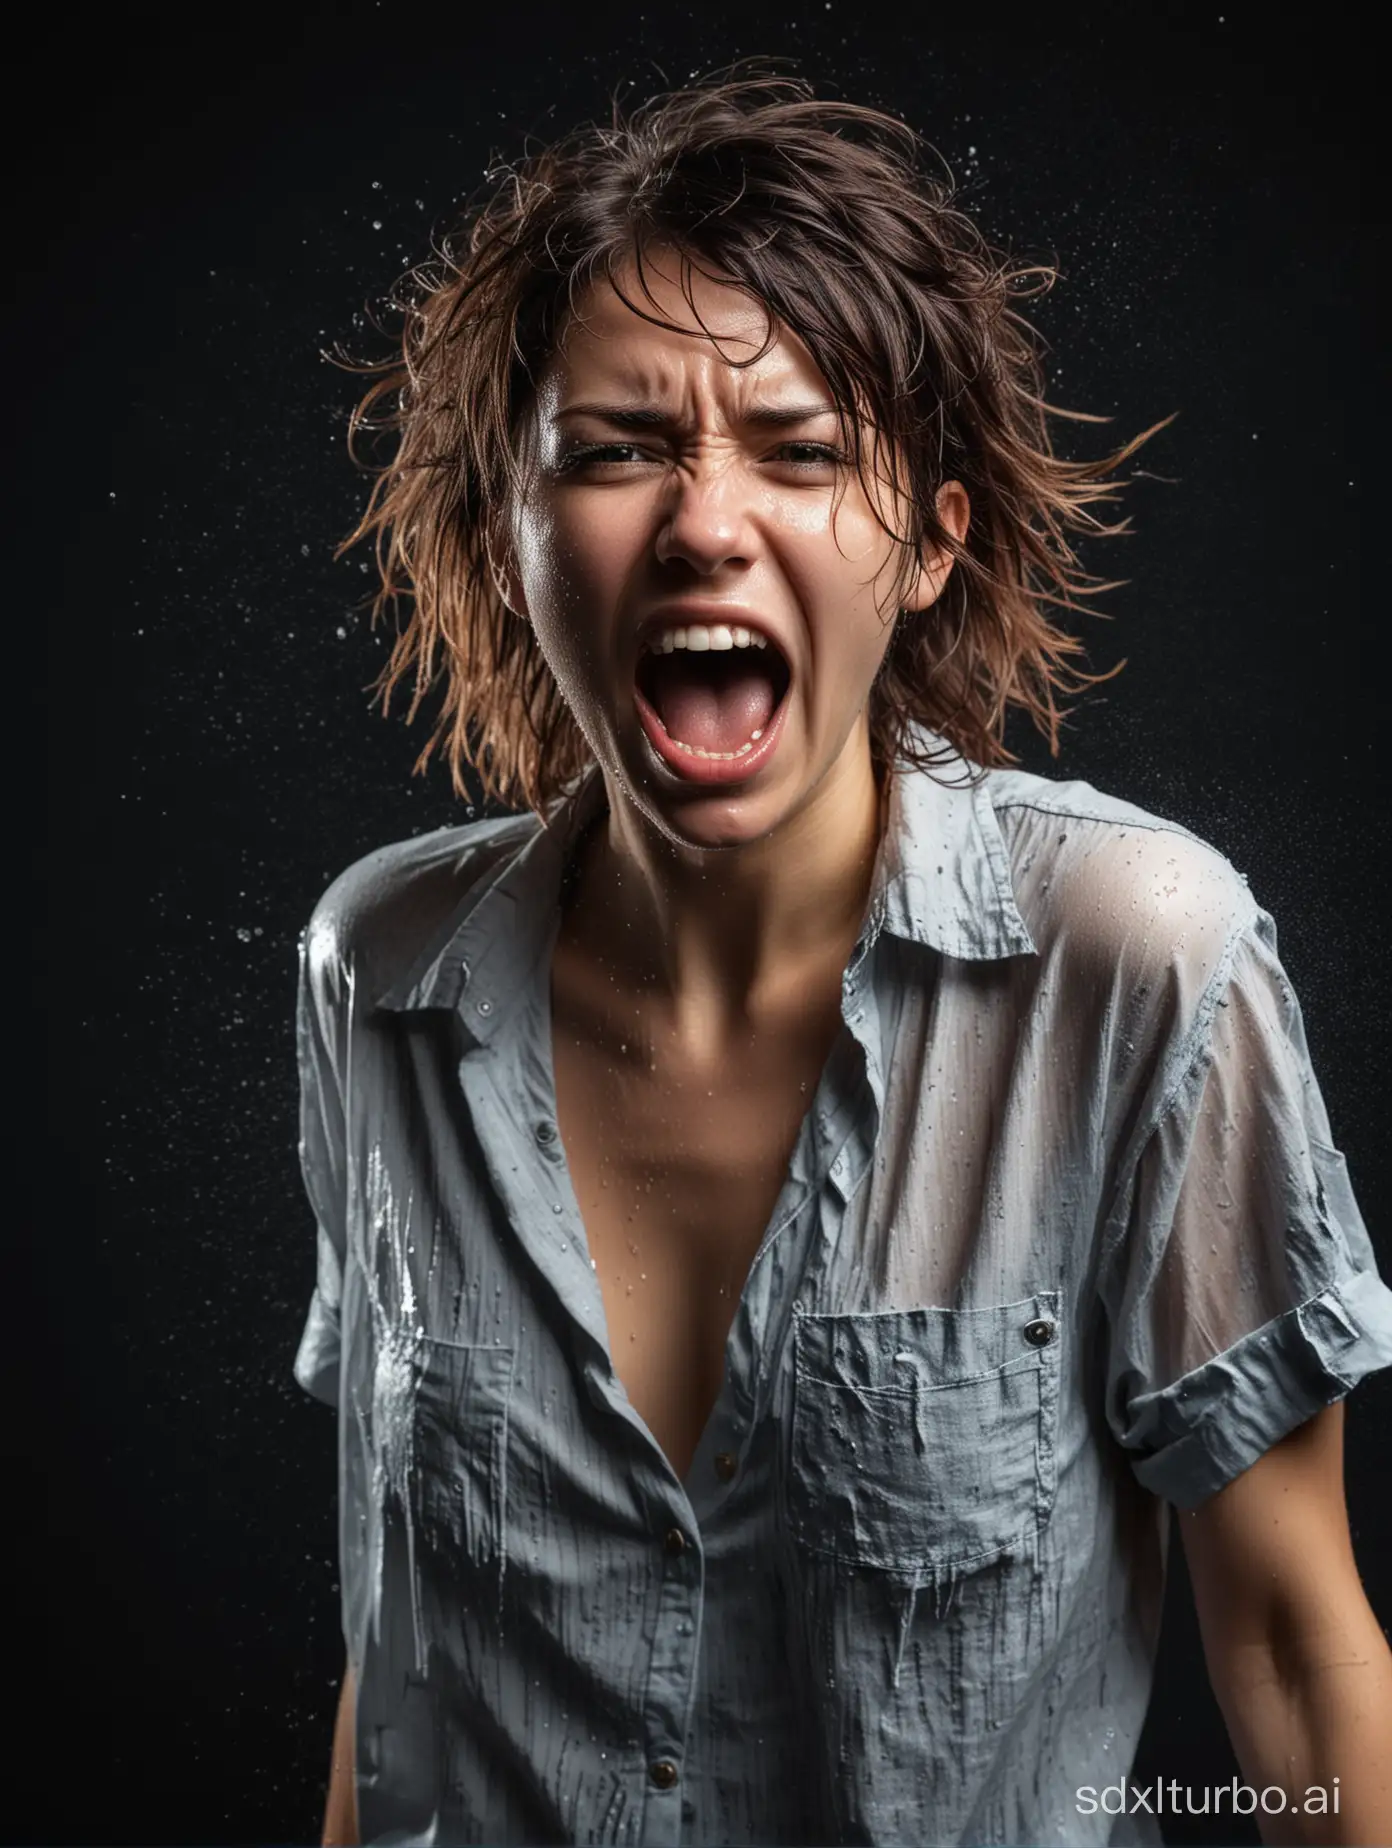 Emotional-Portrait-Young-Woman-Screaming-and-Tearing-Shirt-in-Studio